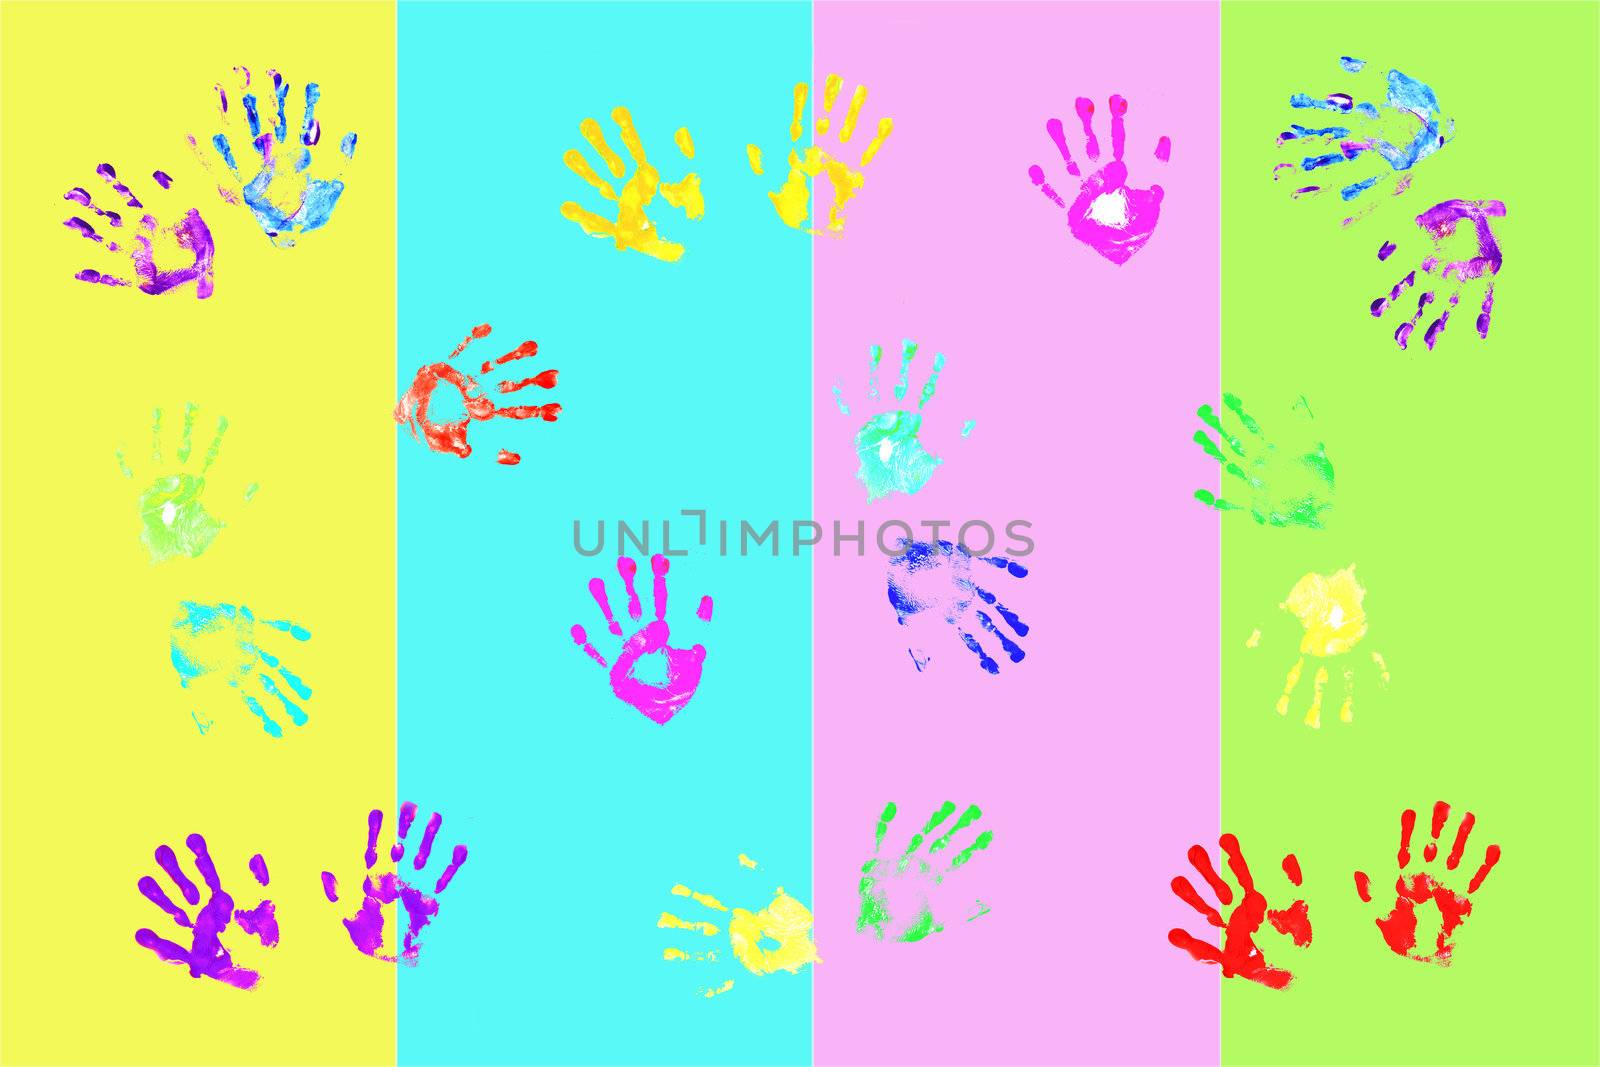 Actual handprints made by children on colorful background

;